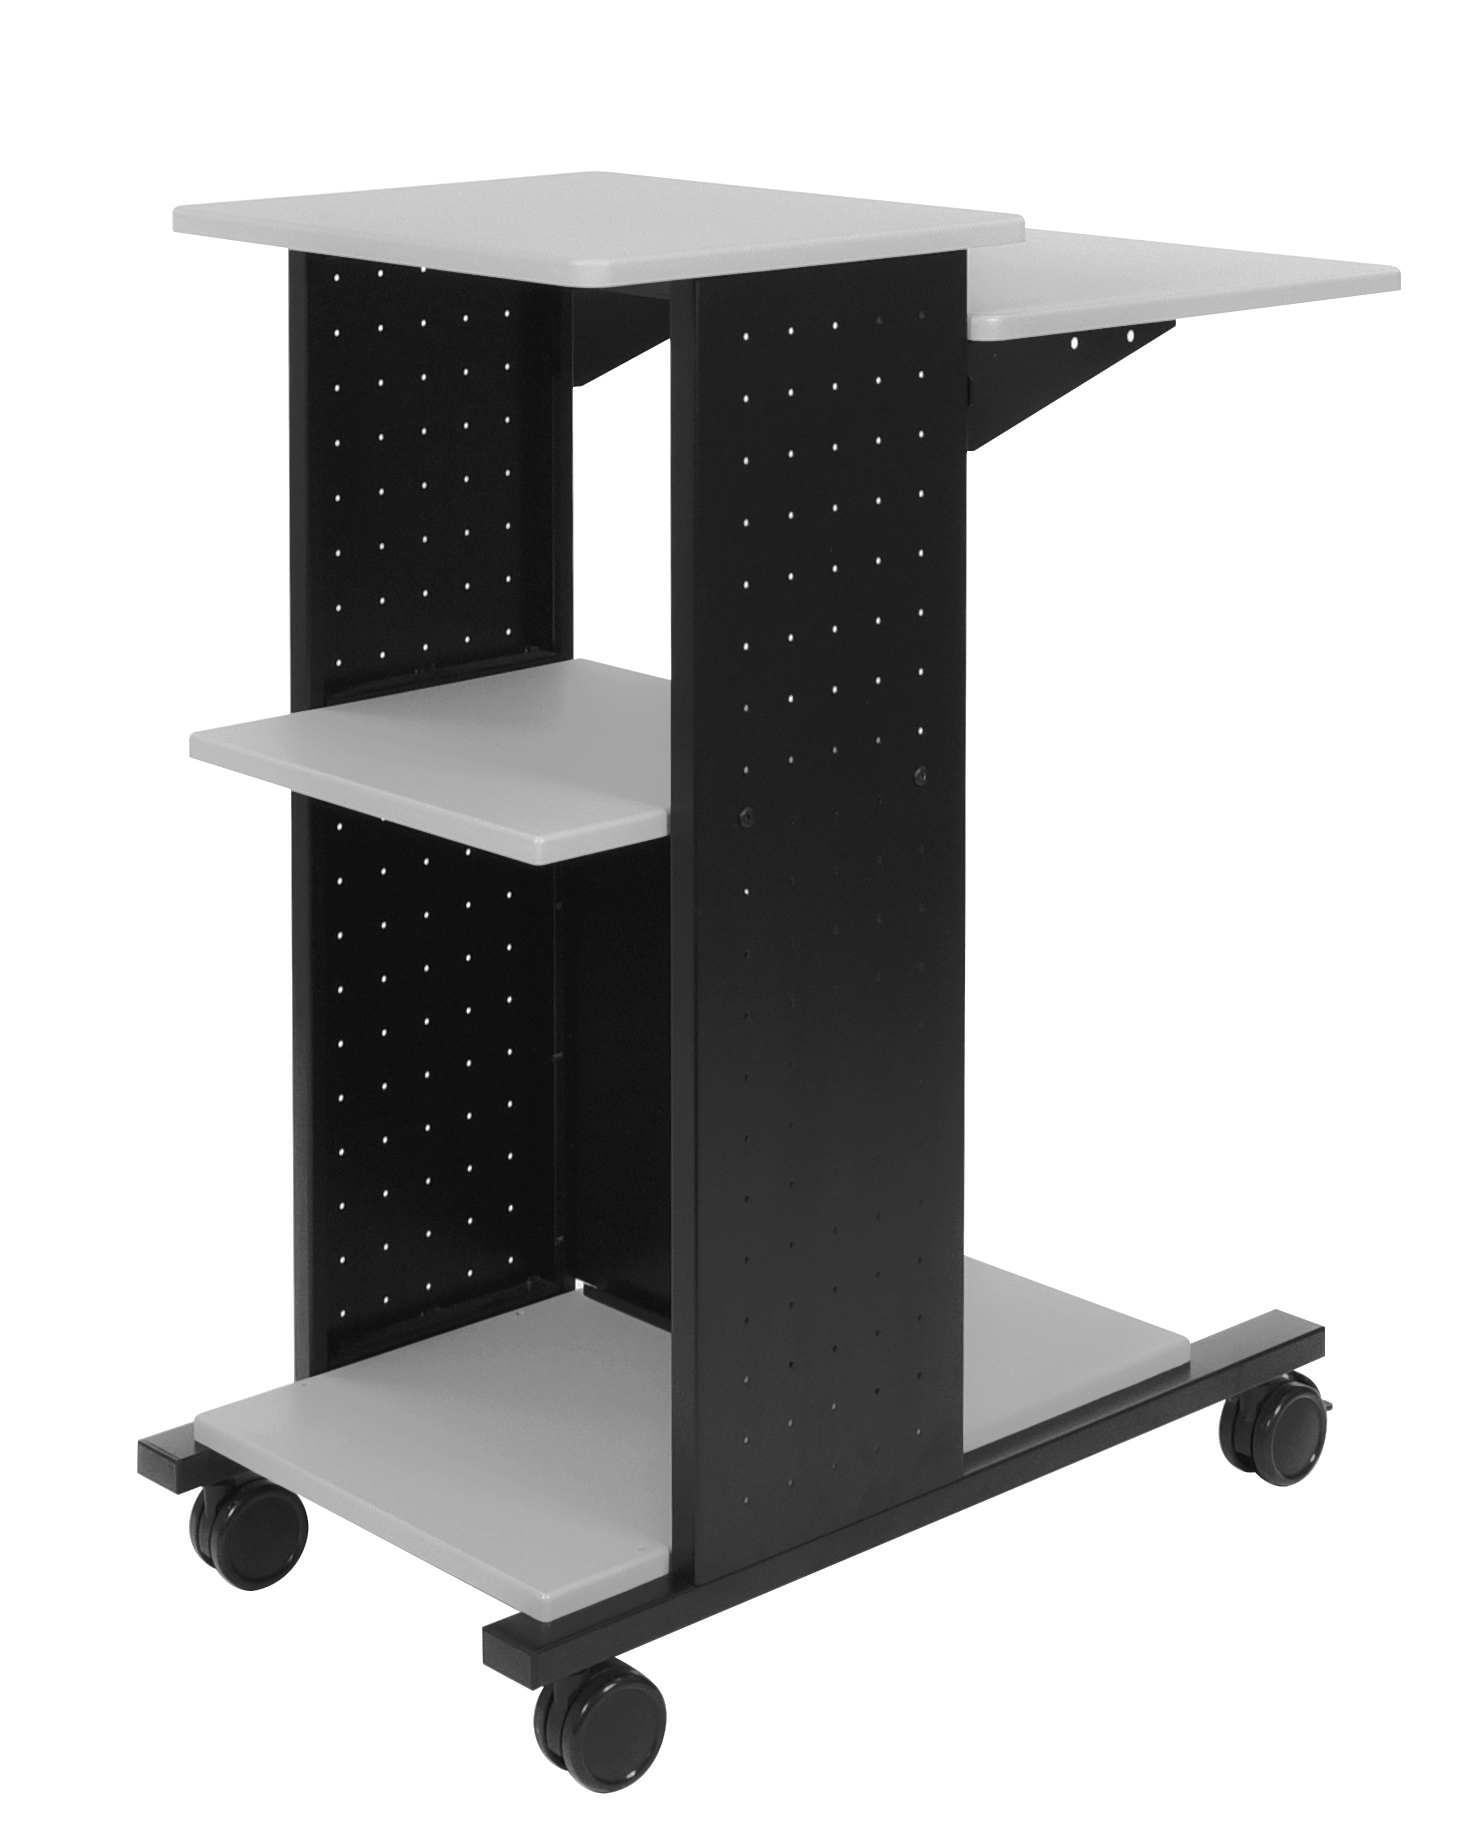 Offex Of-wps4 Mobile Presentation Stand With 4 Shelves - Gray